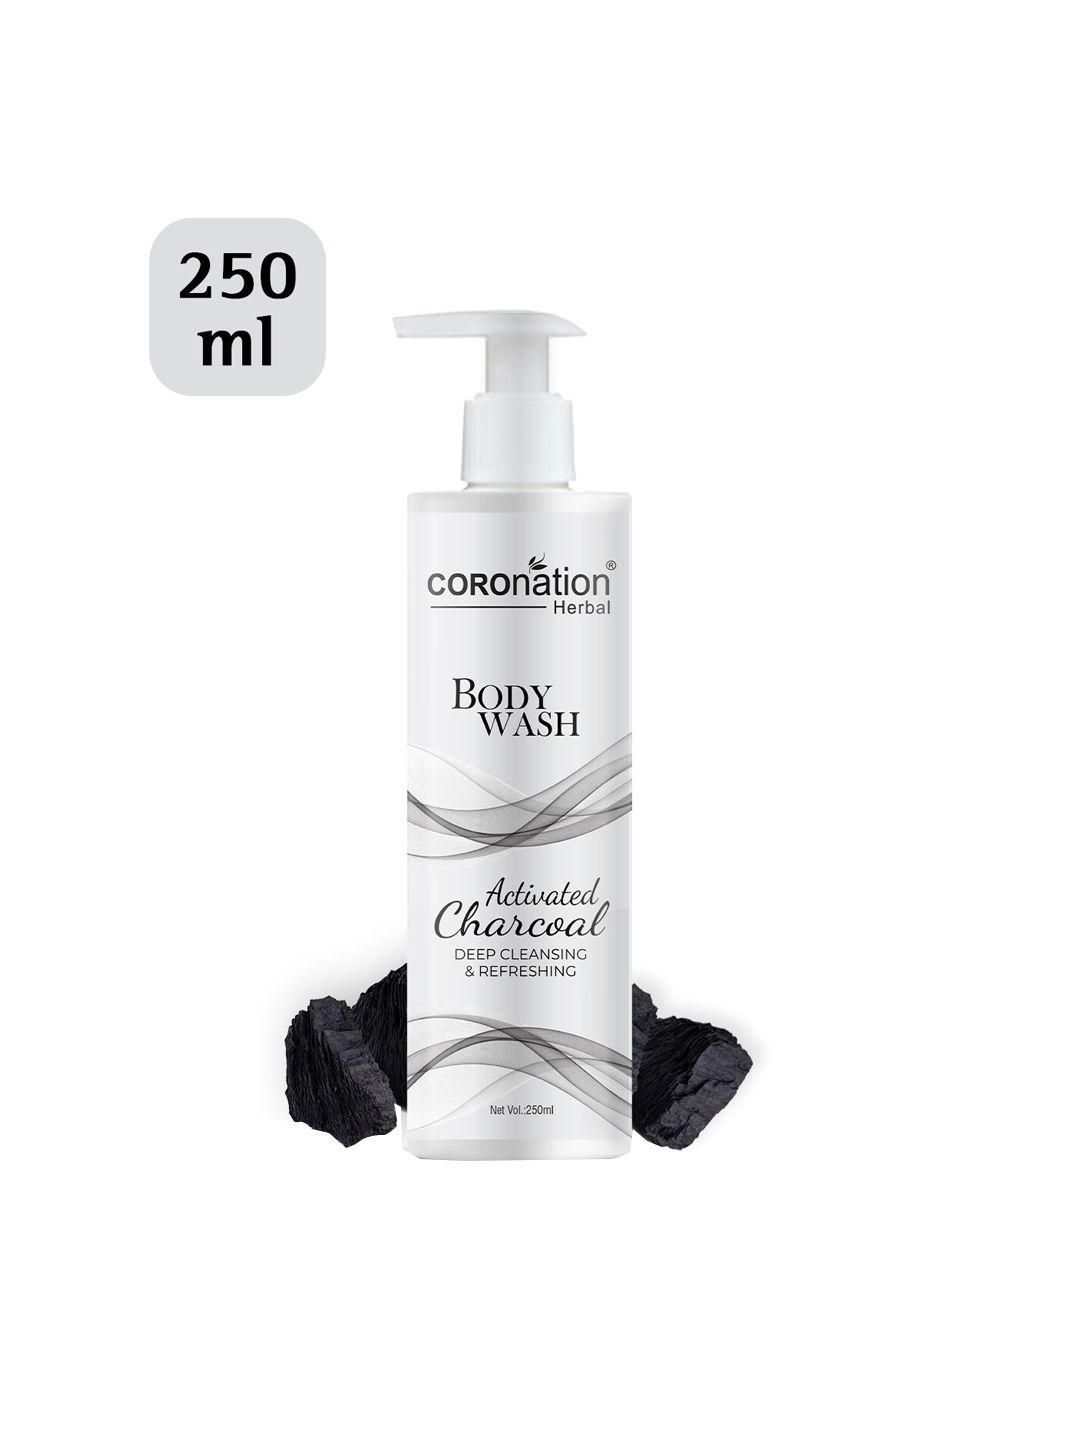 coronation herbal activated charcoal deep cleansing & refreshing body wash - 250 ml